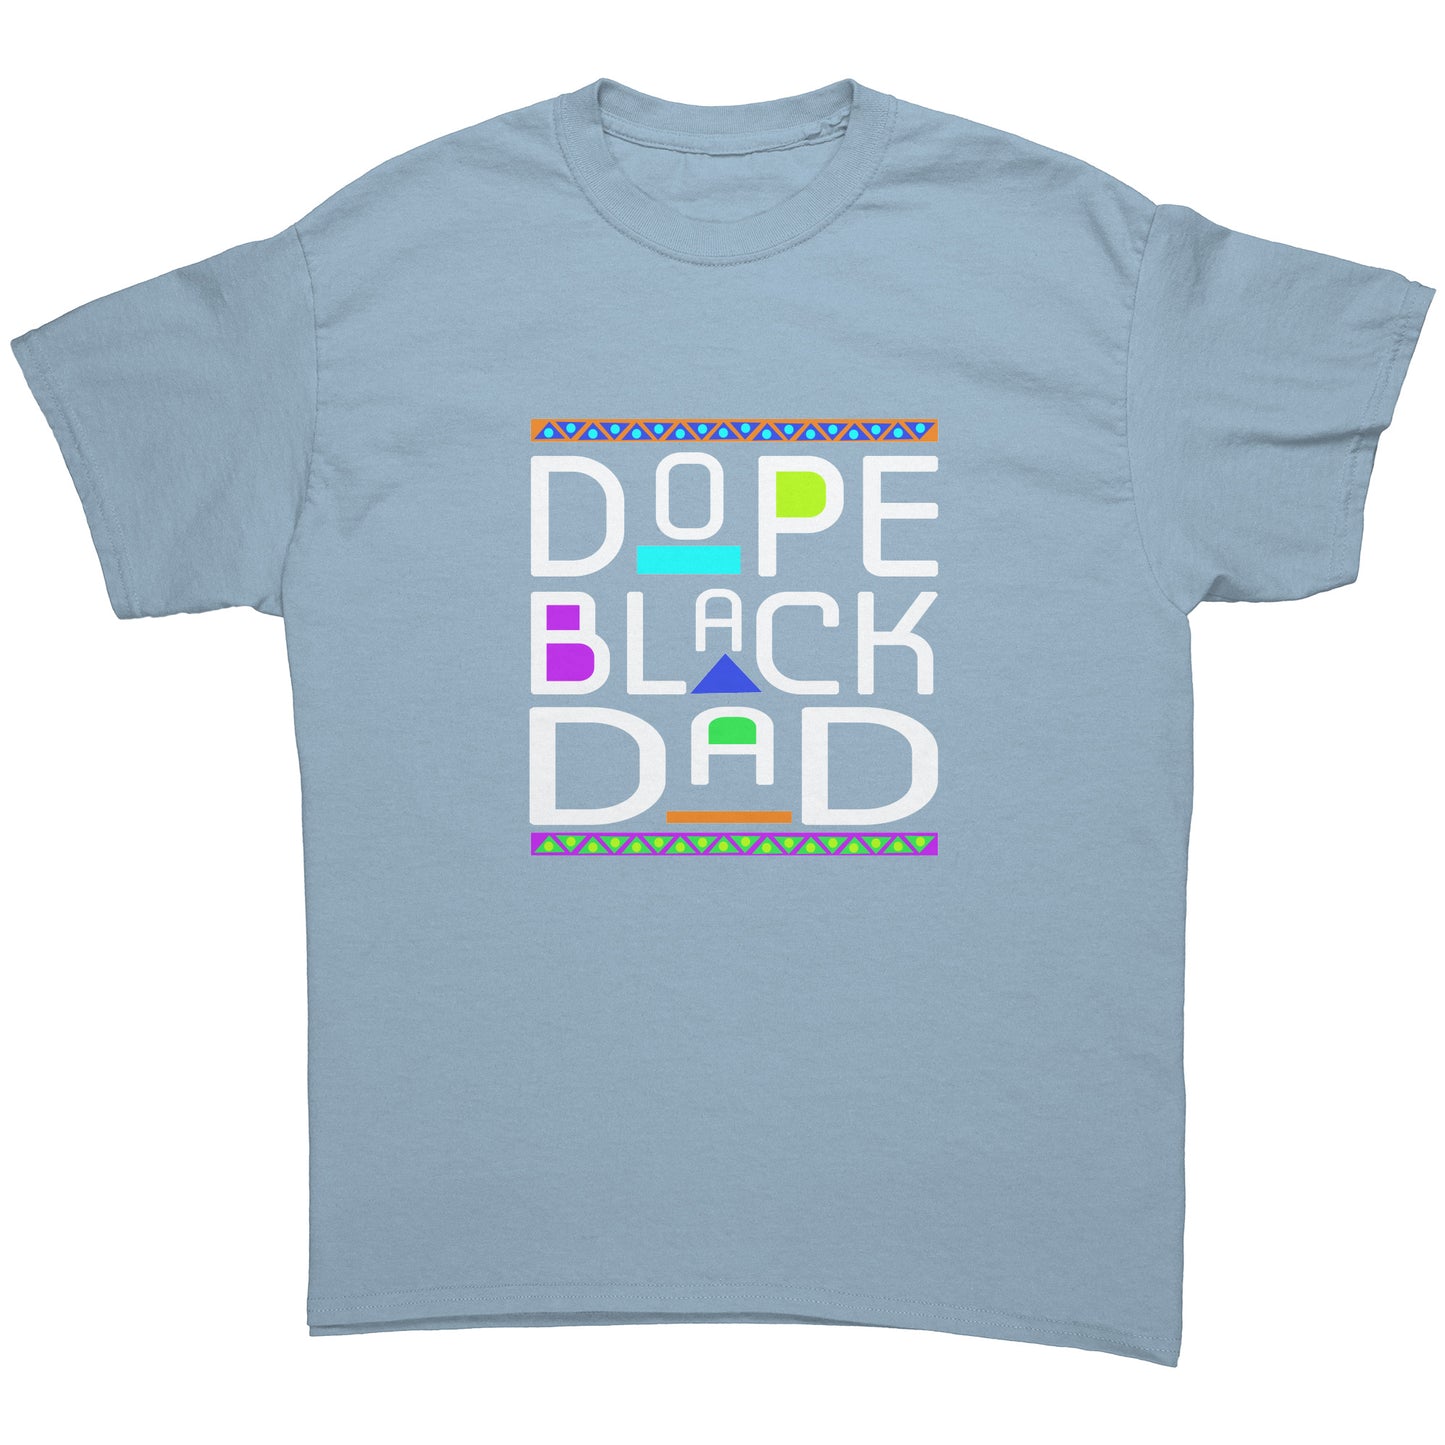 Dope Black Dad Tee White Lettering